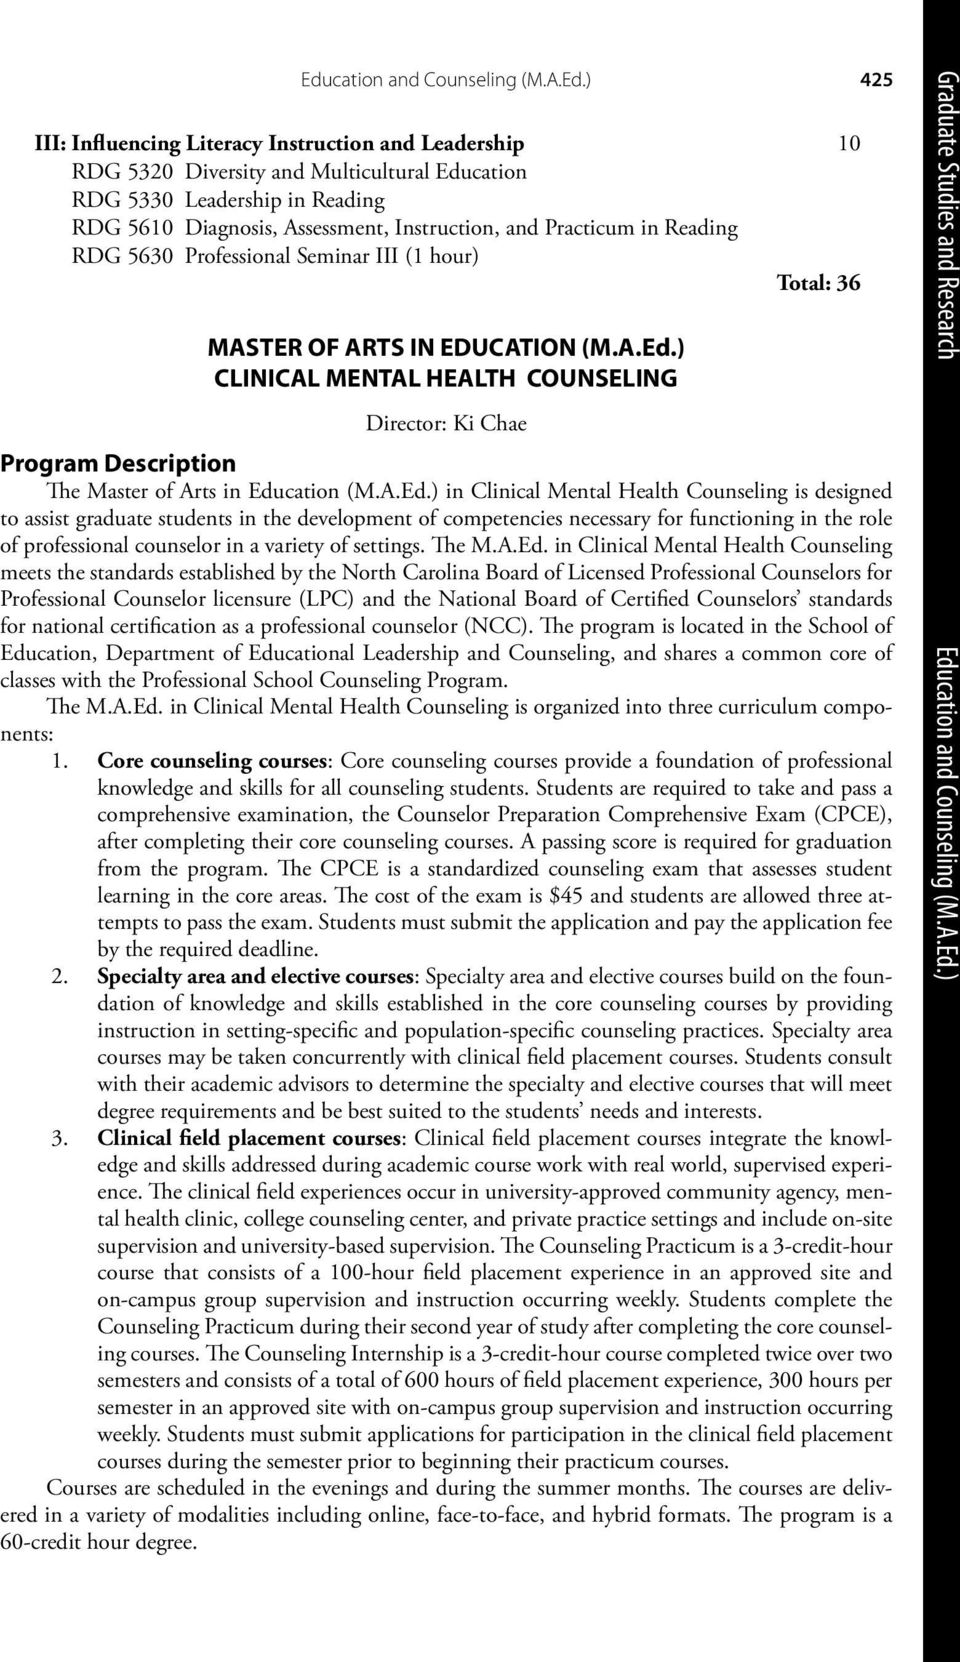 ) CLINICAL MENTAL HEALTH COUNSELING 10 Total: 36 Director: Ki Chae Program Description The Master of Arts in Edu